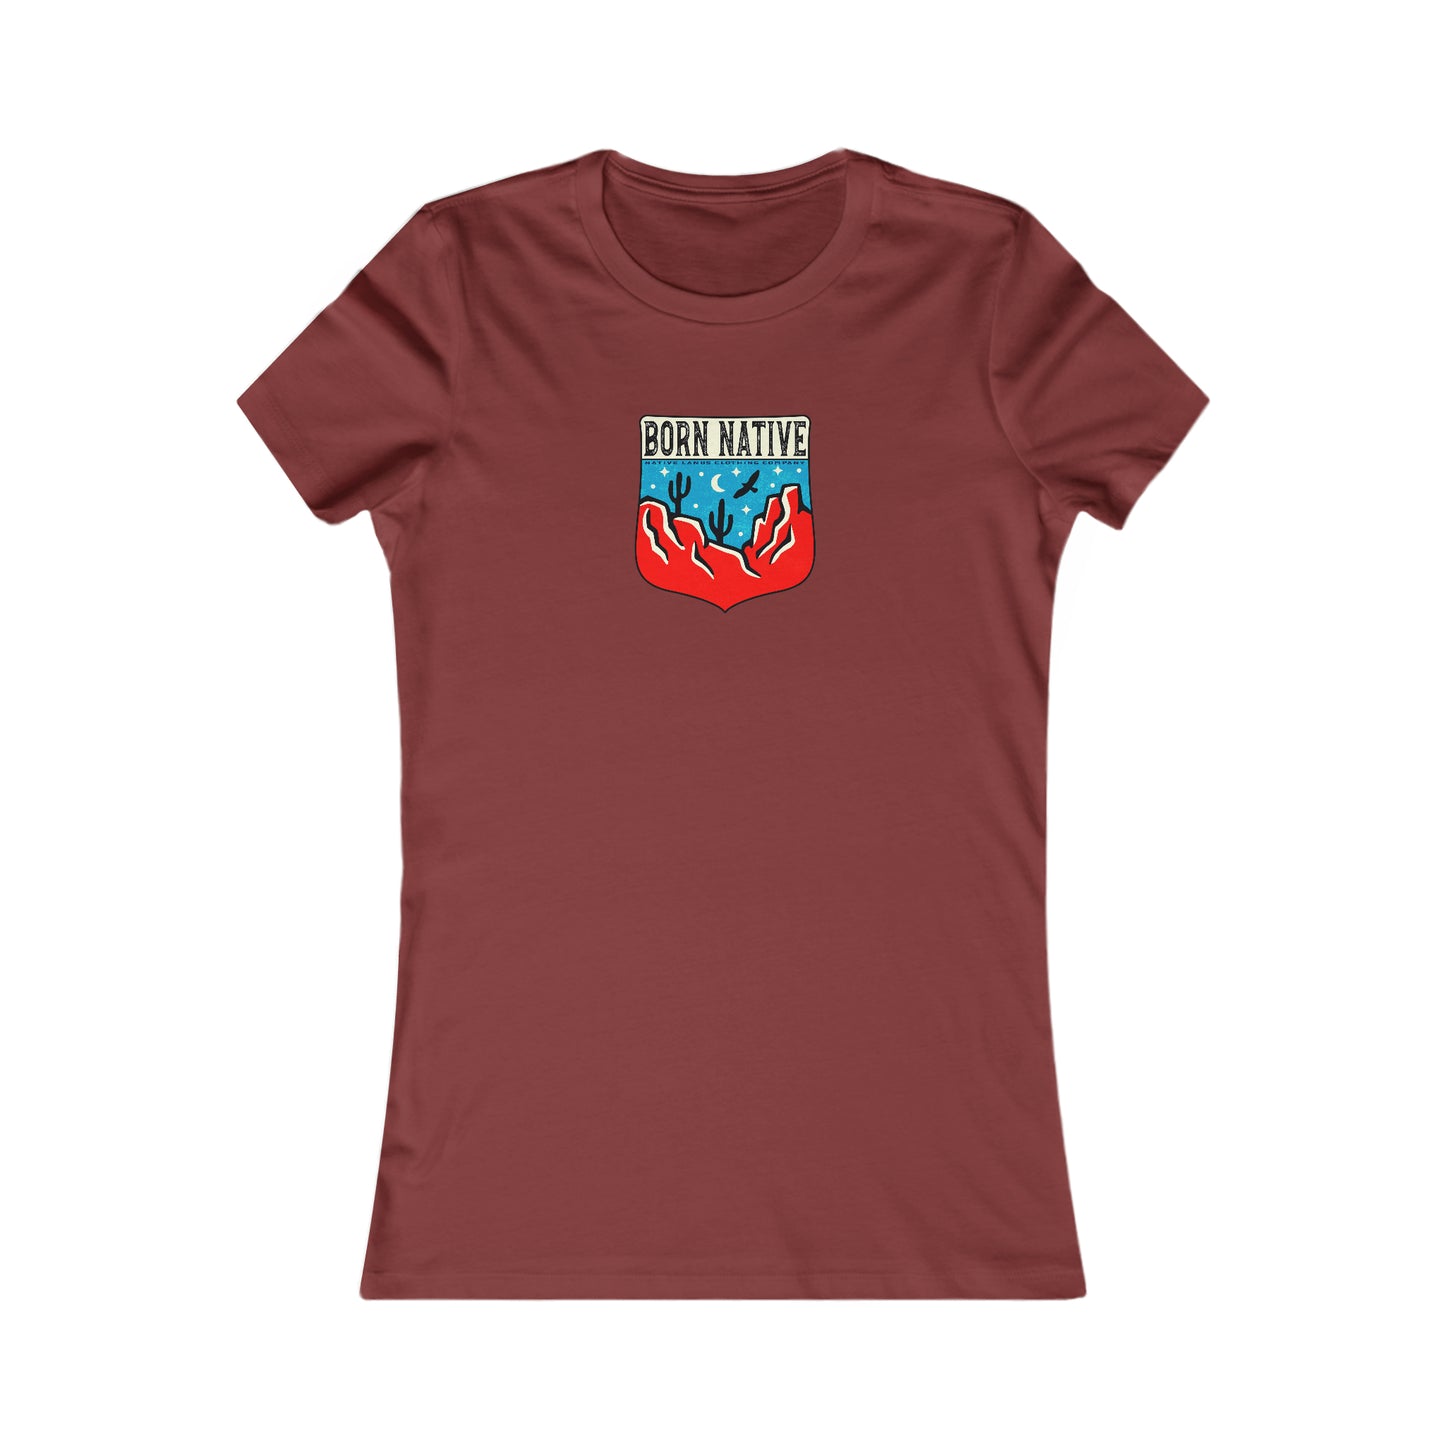 Womens Born Native Cactus Shirt Cotton  - First Nations, Canadian Aboriginal, Indigenous, Native American